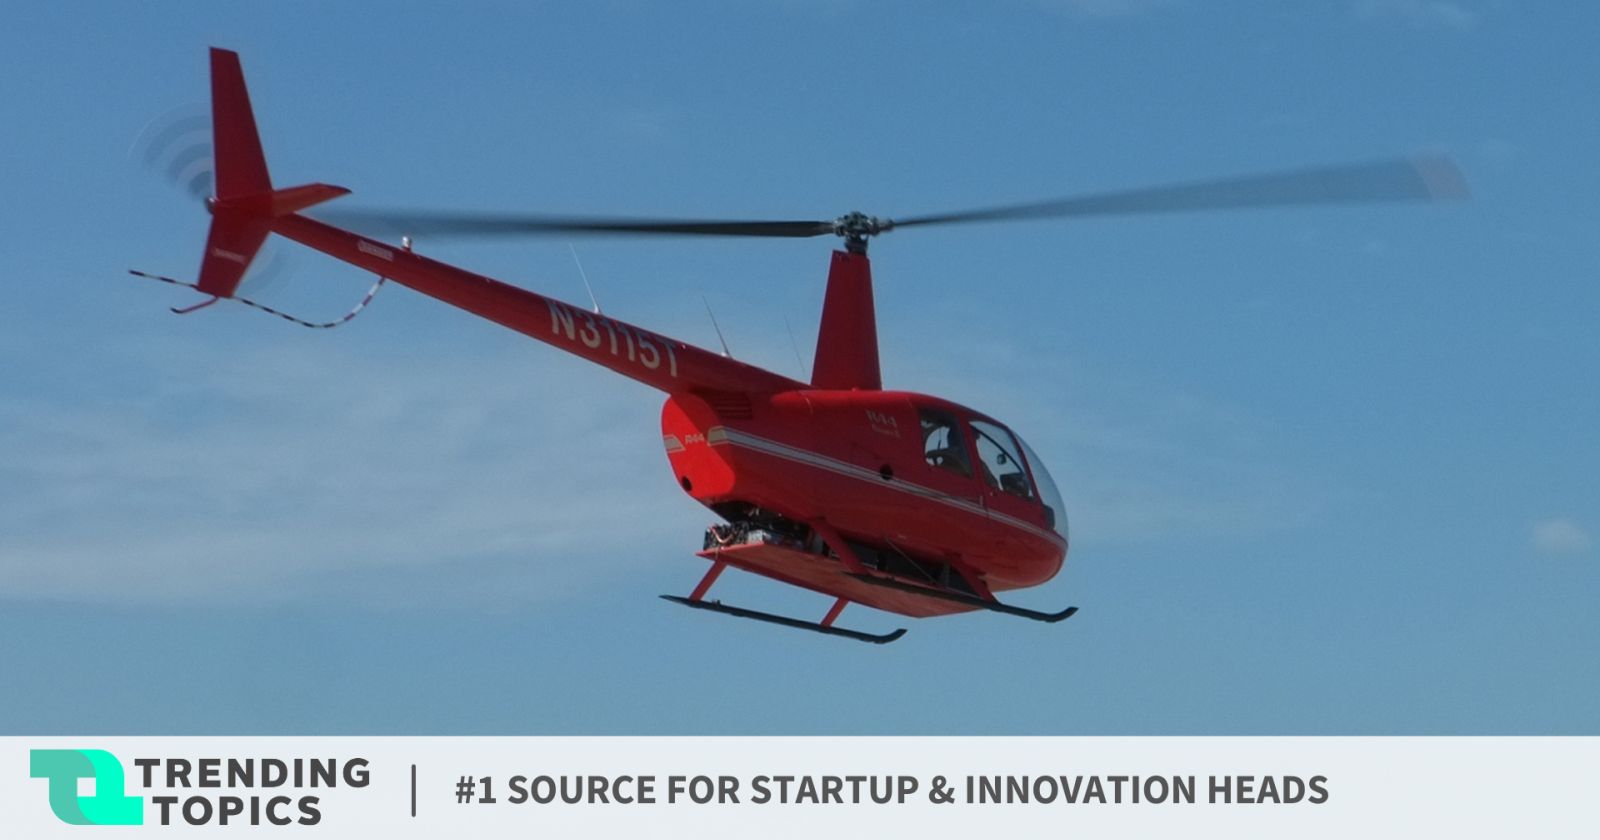 E-helicopter achieves record test flight in California